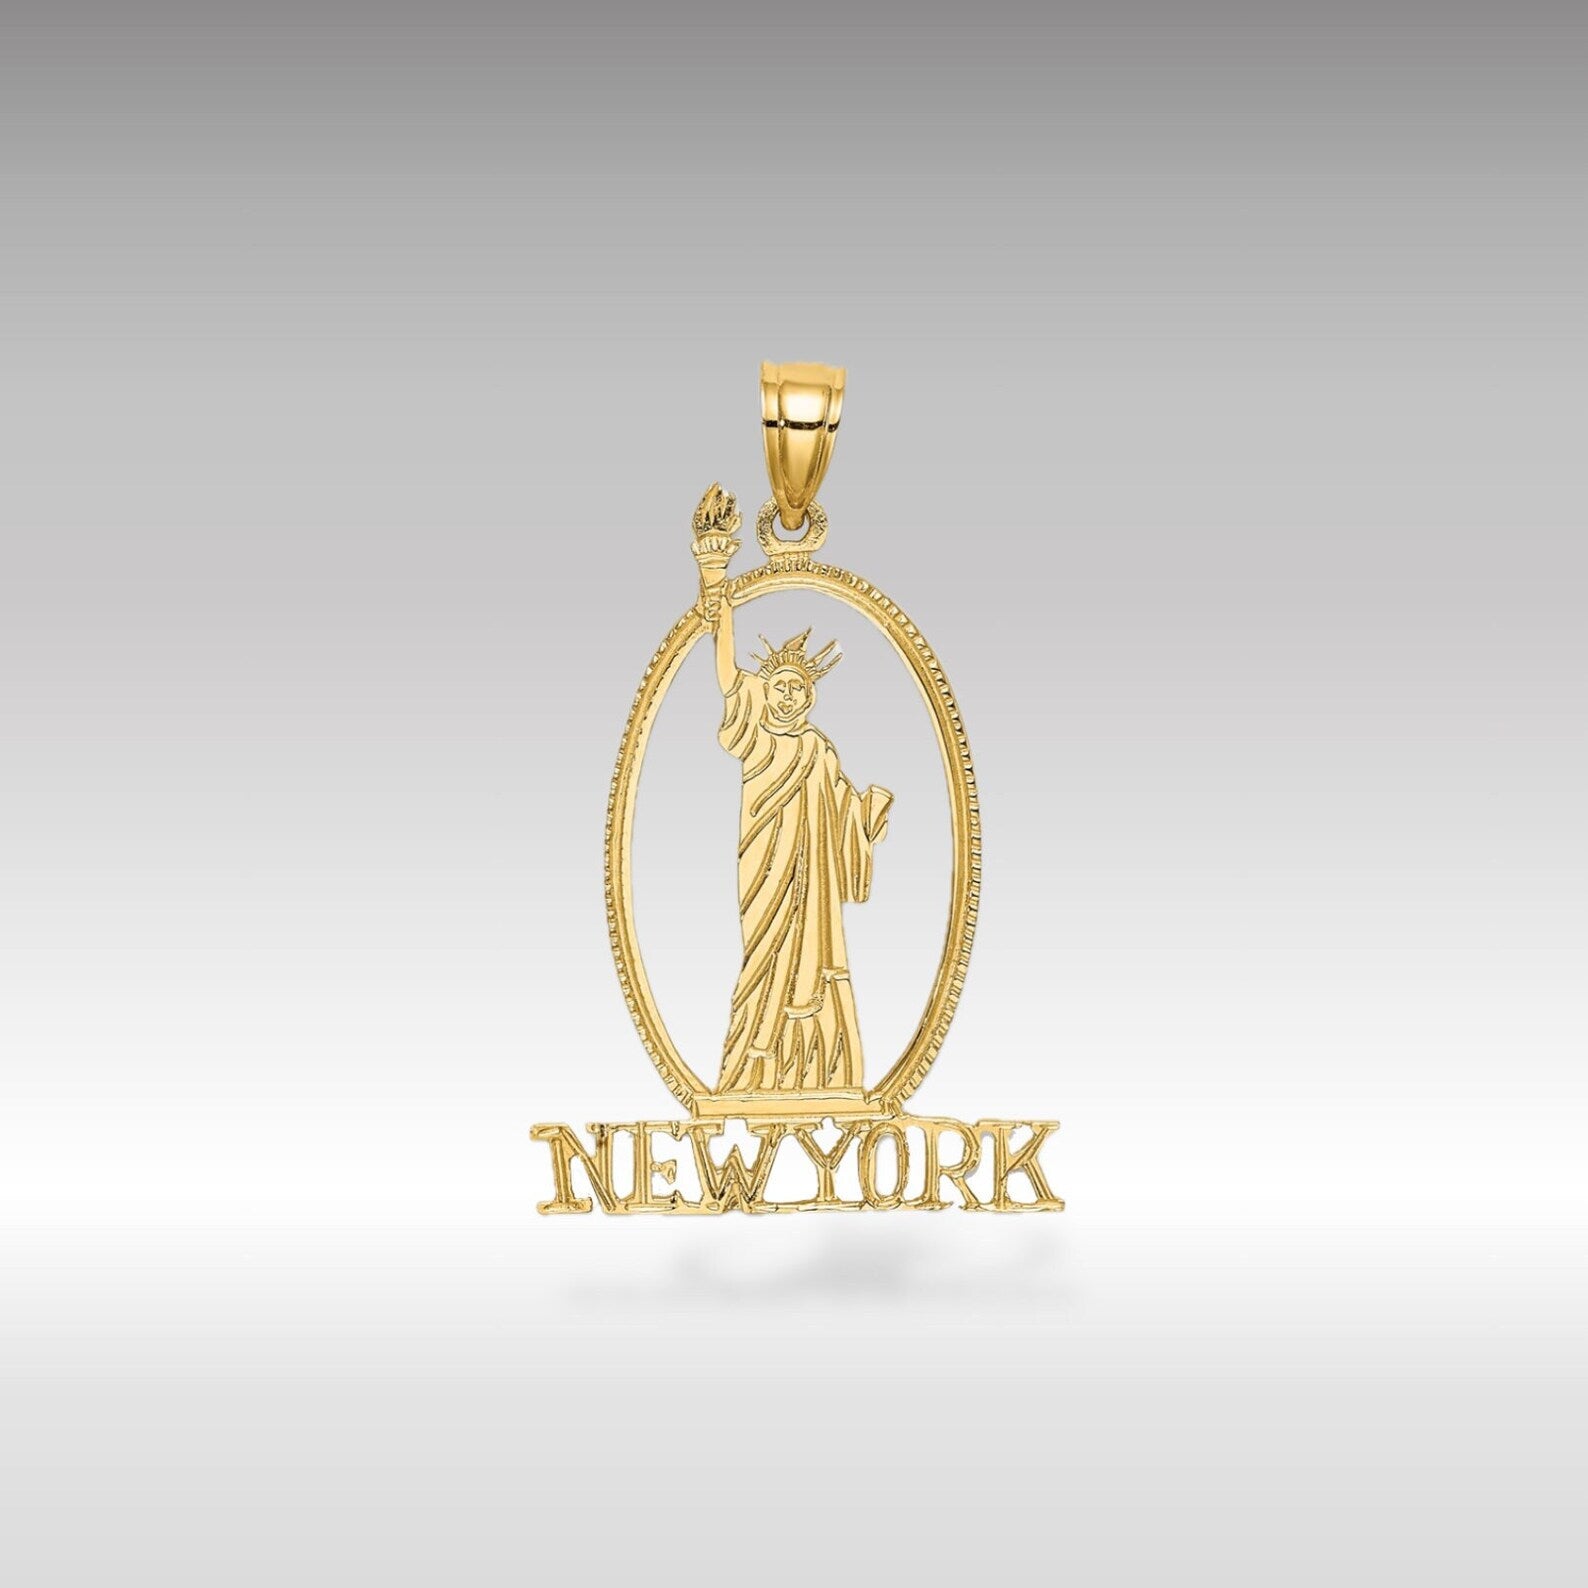 Gold New York with Statue of Liberty Charm Model-C3073 - Charlie & Co. Jewelry